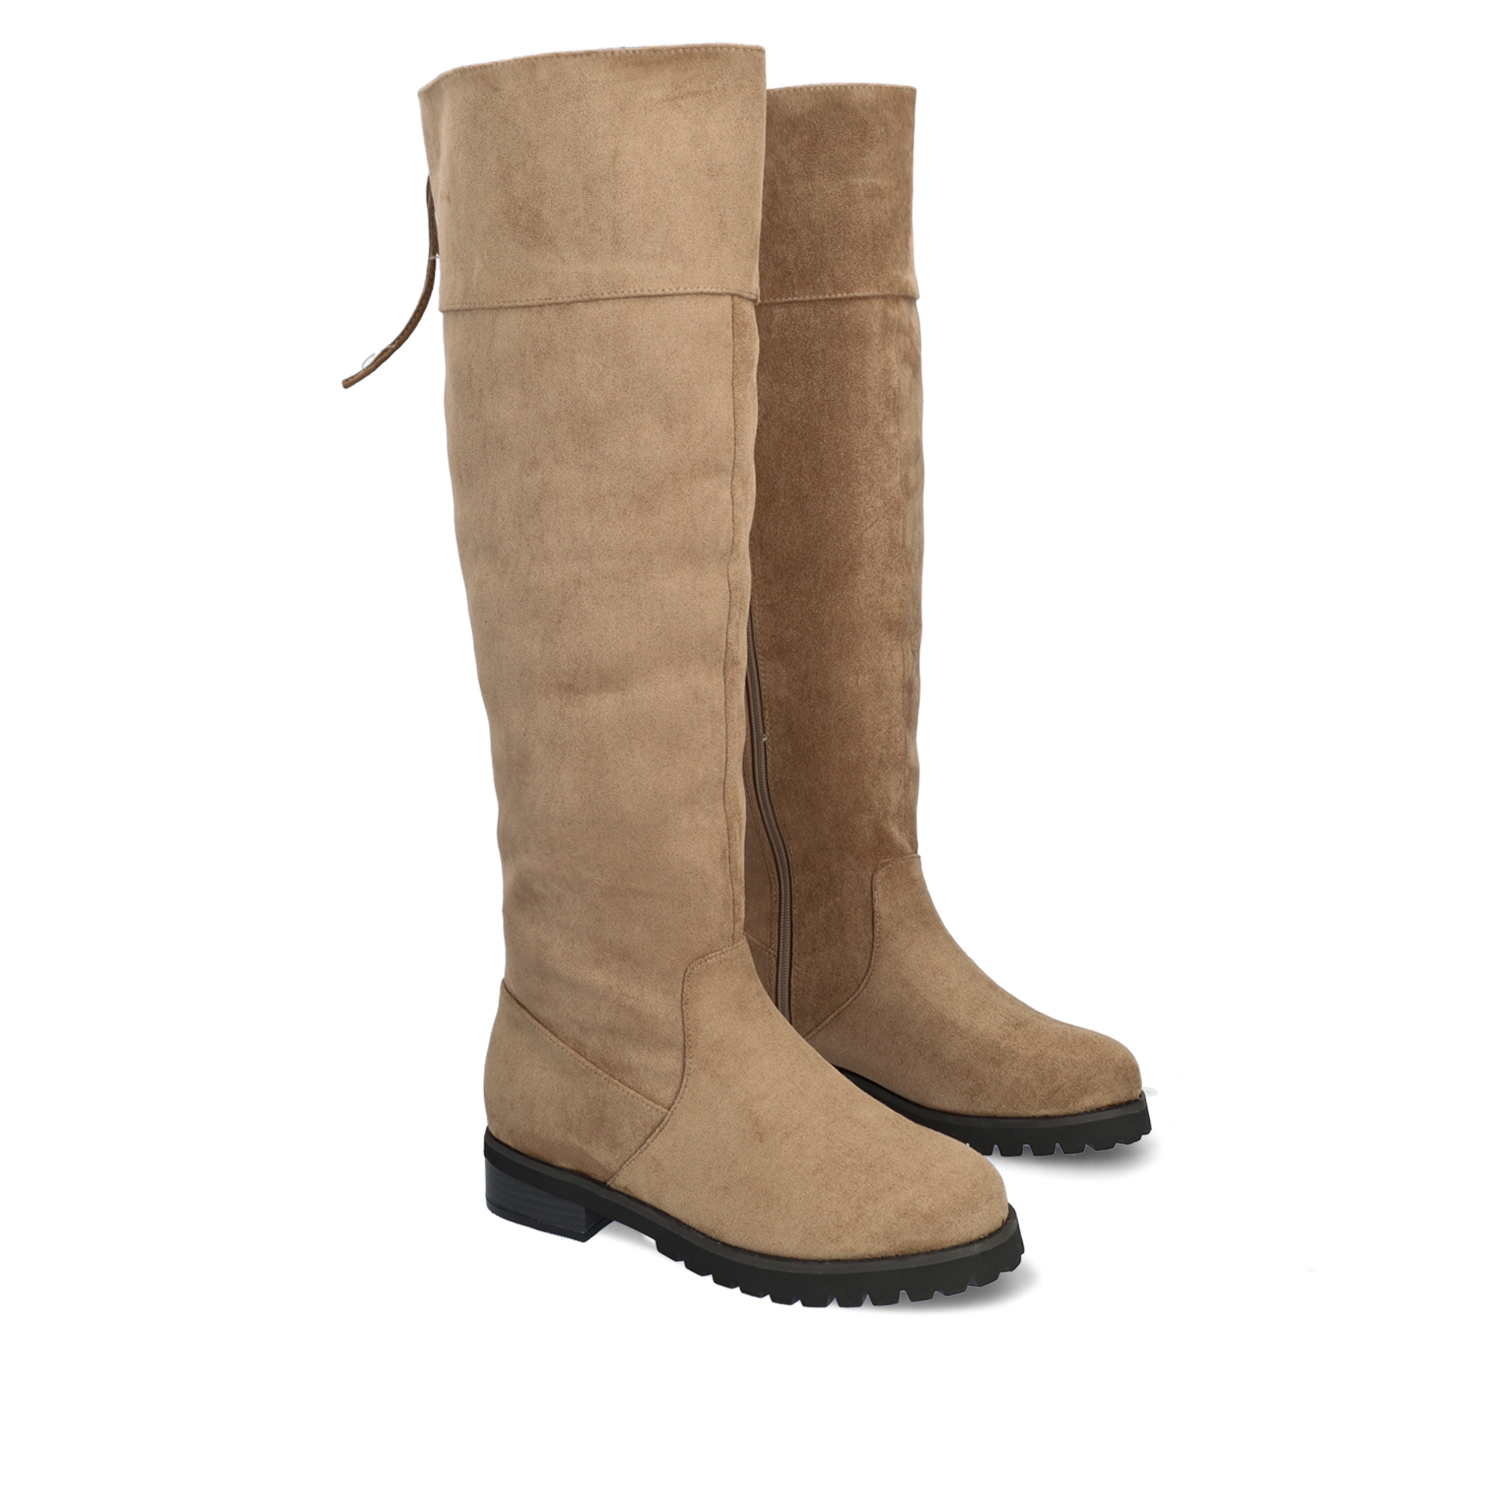 Knee-high boots in light brown faux suede 